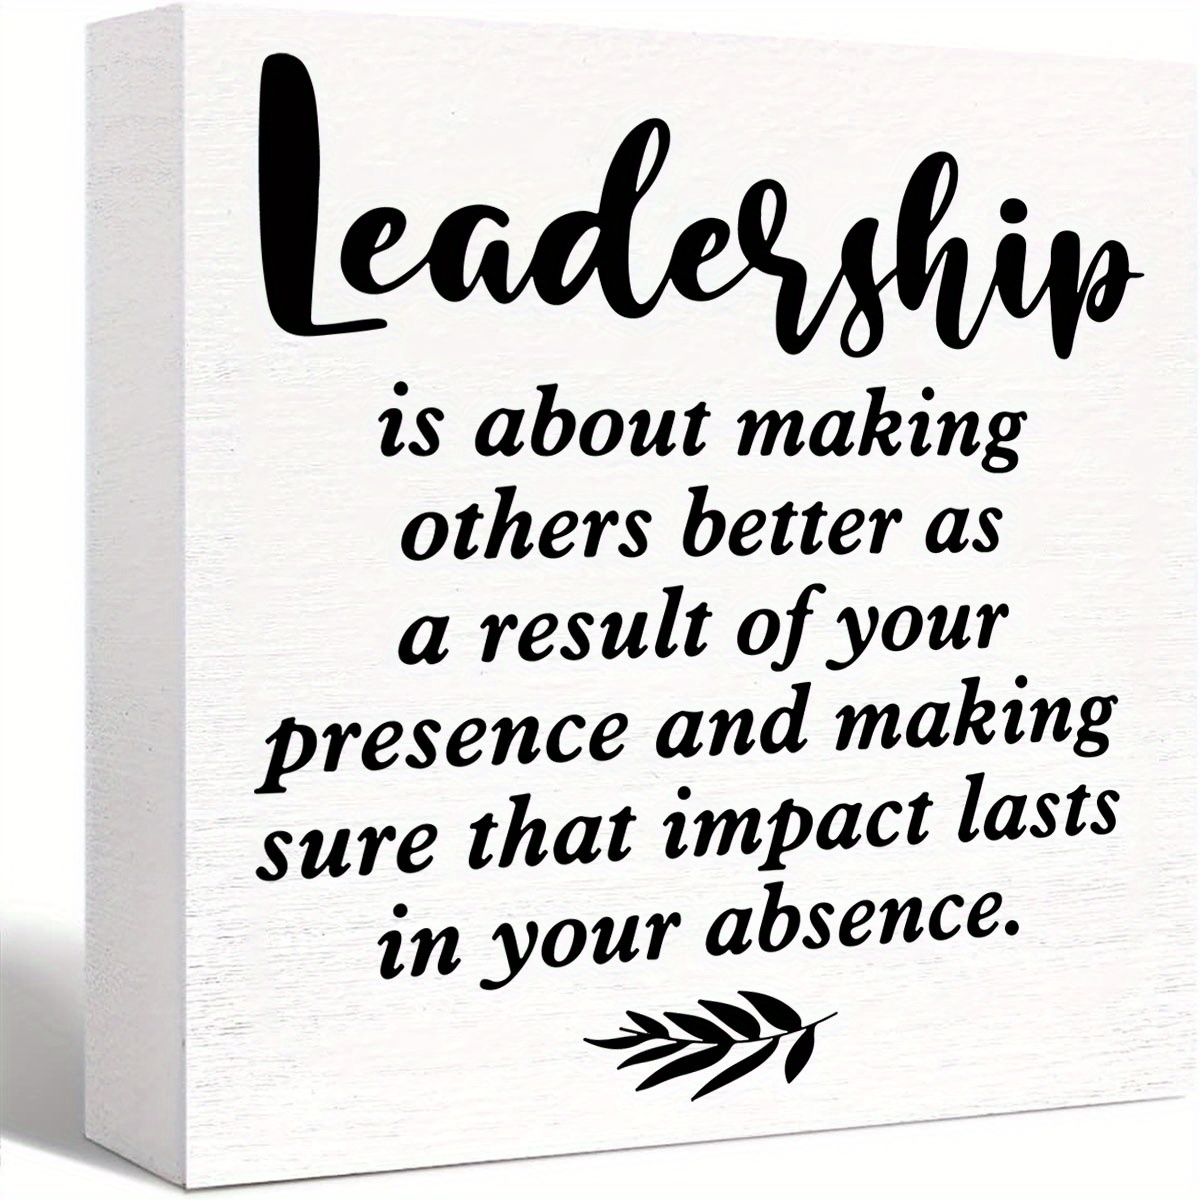 

1pc, Inspirational Wood Box Sign Leadership Quote Wooden Block Sign Motivational Desk Décor For Home Office Cubicle Table Décor,retirement Gift Boss Gift For Leader